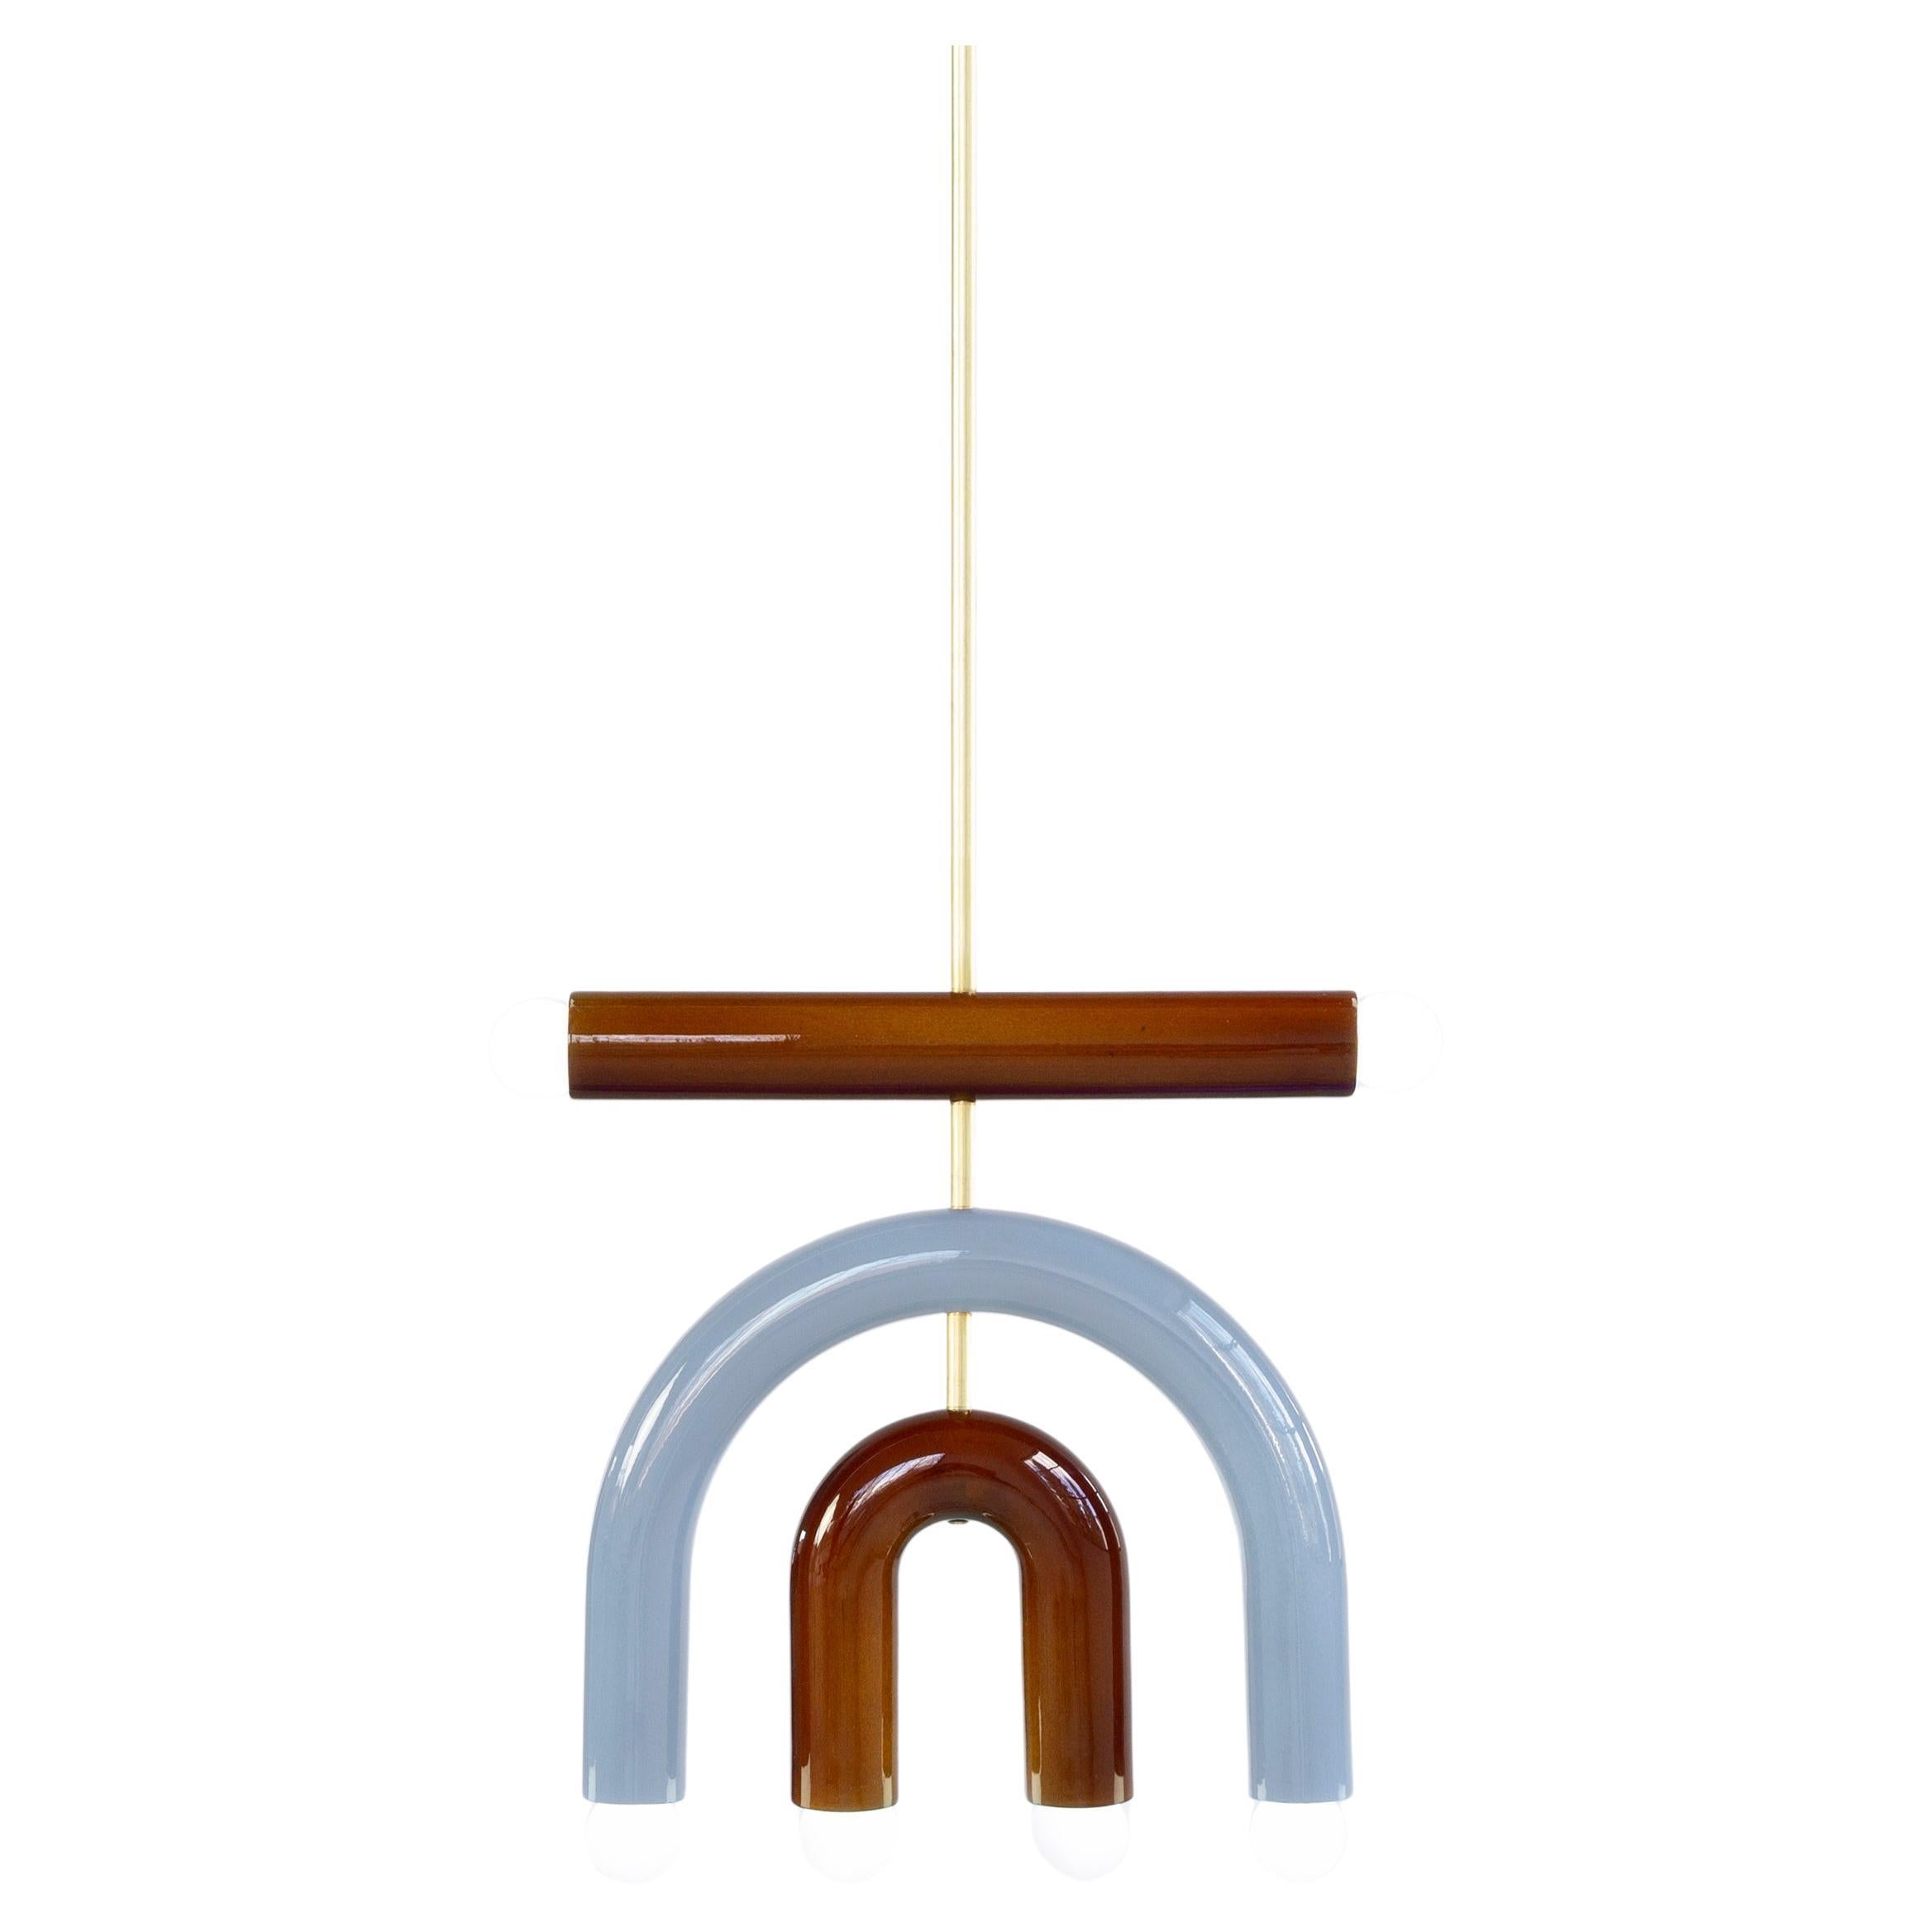 TRN D1 Pendant lamp / ceiling lamp / chandelier 
Designer: Pani Jurek

Model shown: TRN D1, Green, Light blue, Brown, Brass rod 
Dimensions: H 37.5 x 35 x 5 cm

Bulb (not included): E27/E26, compatible with US electric system

Materials: Hand glazed